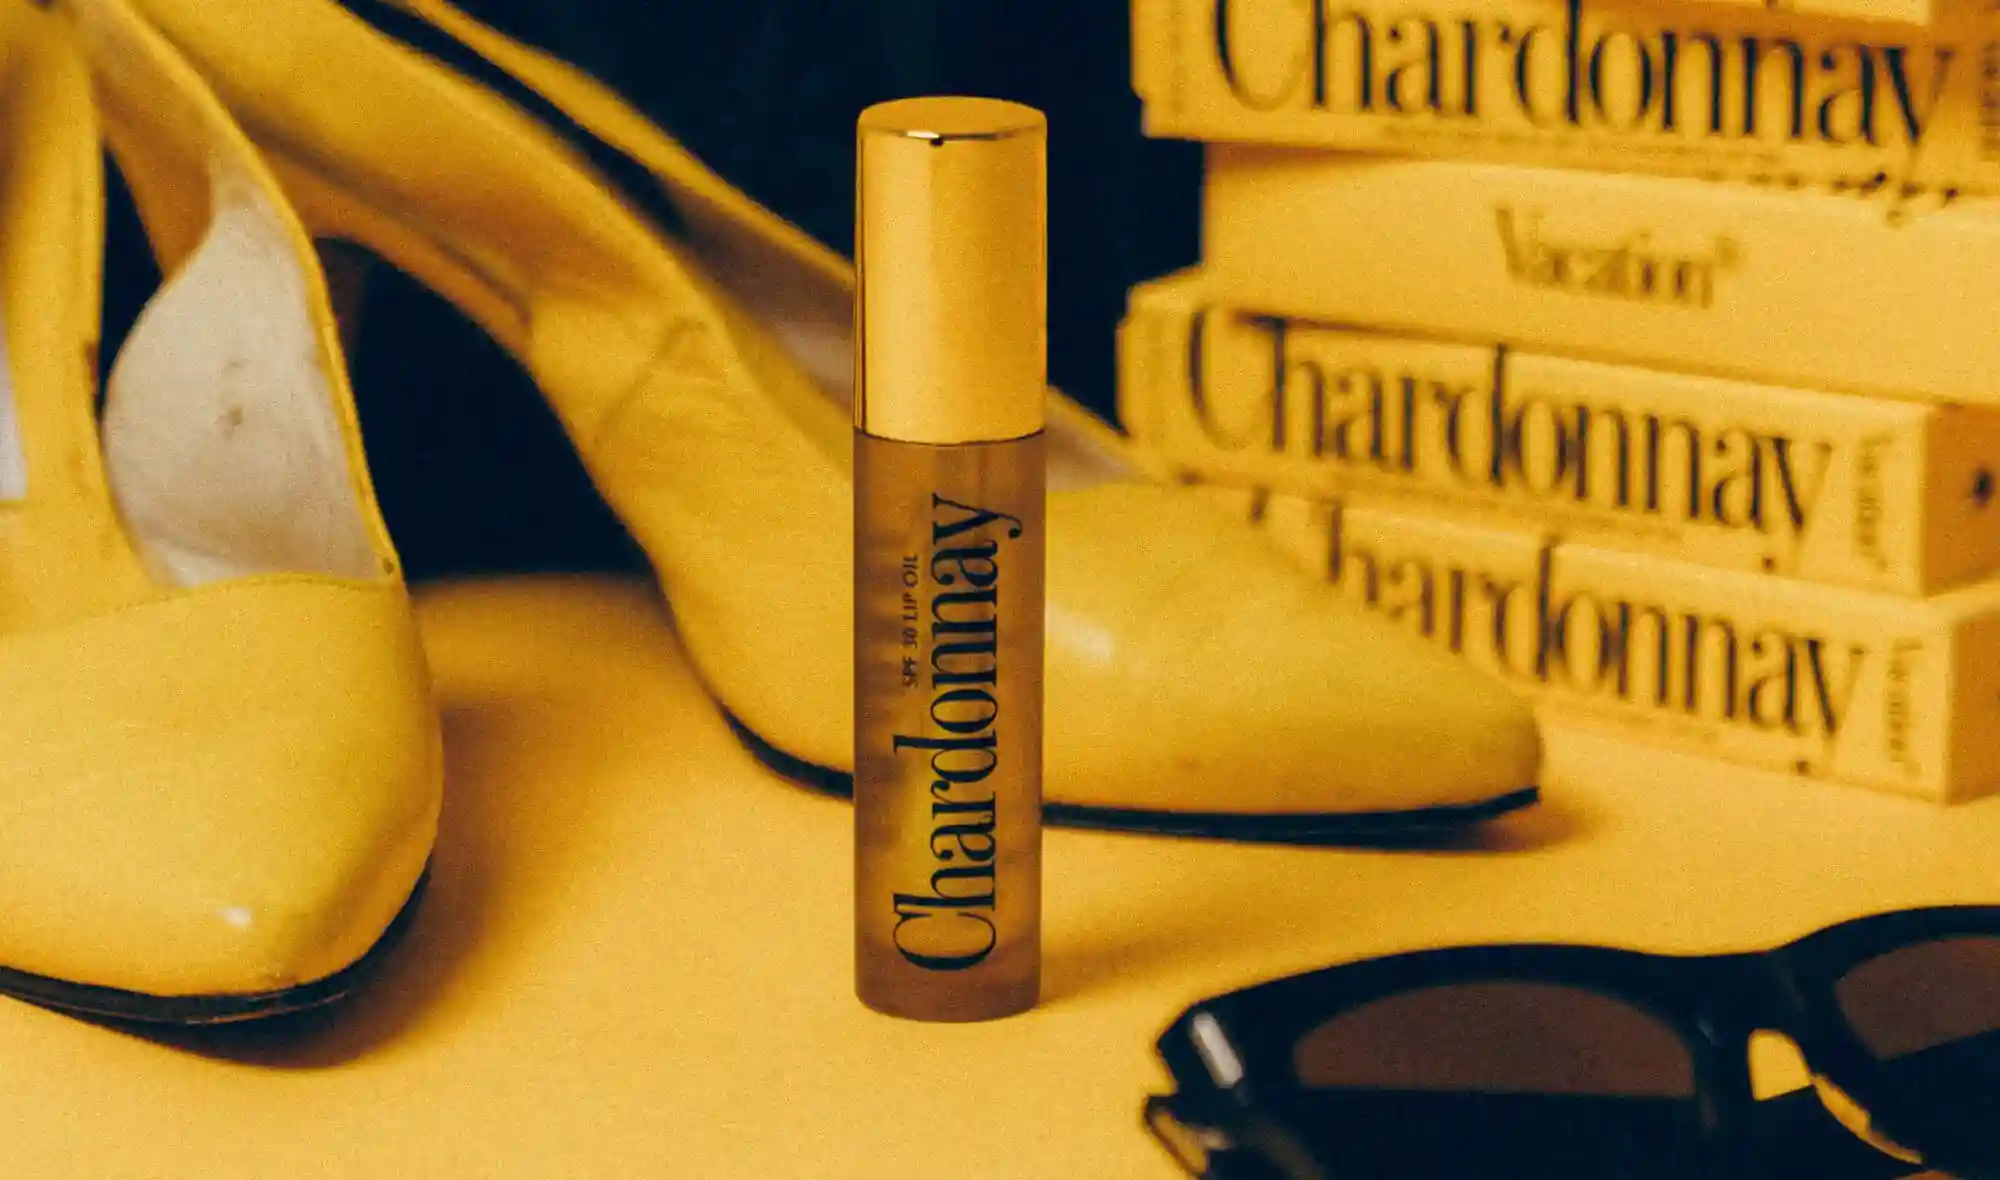 You are currently viewing Chardonnay Lip Oil Review: Is it Worth the Hype?